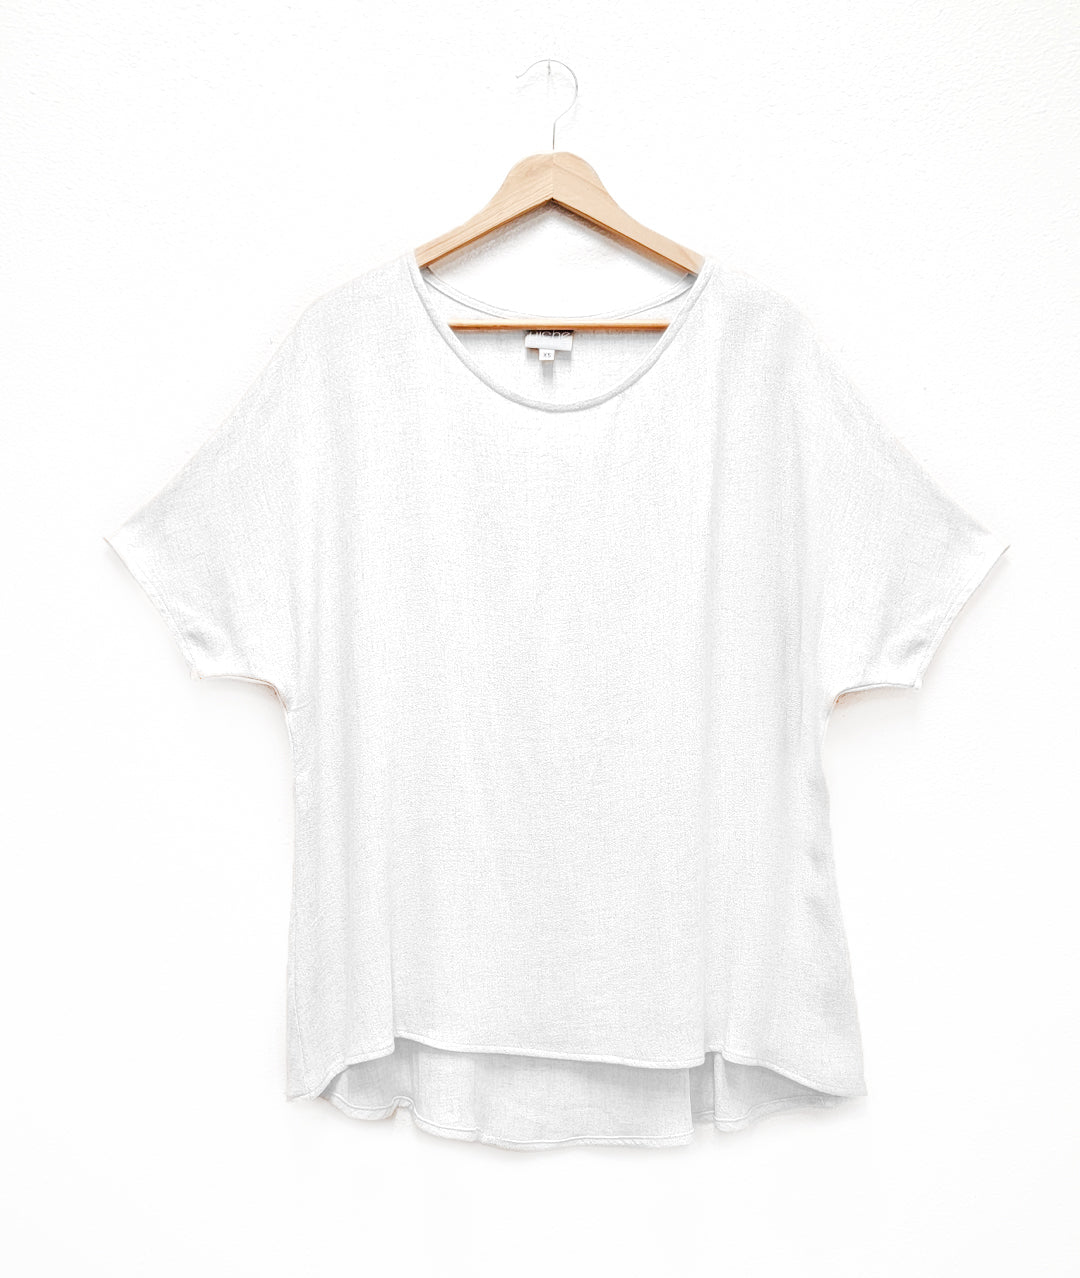 long pullover white tee style top